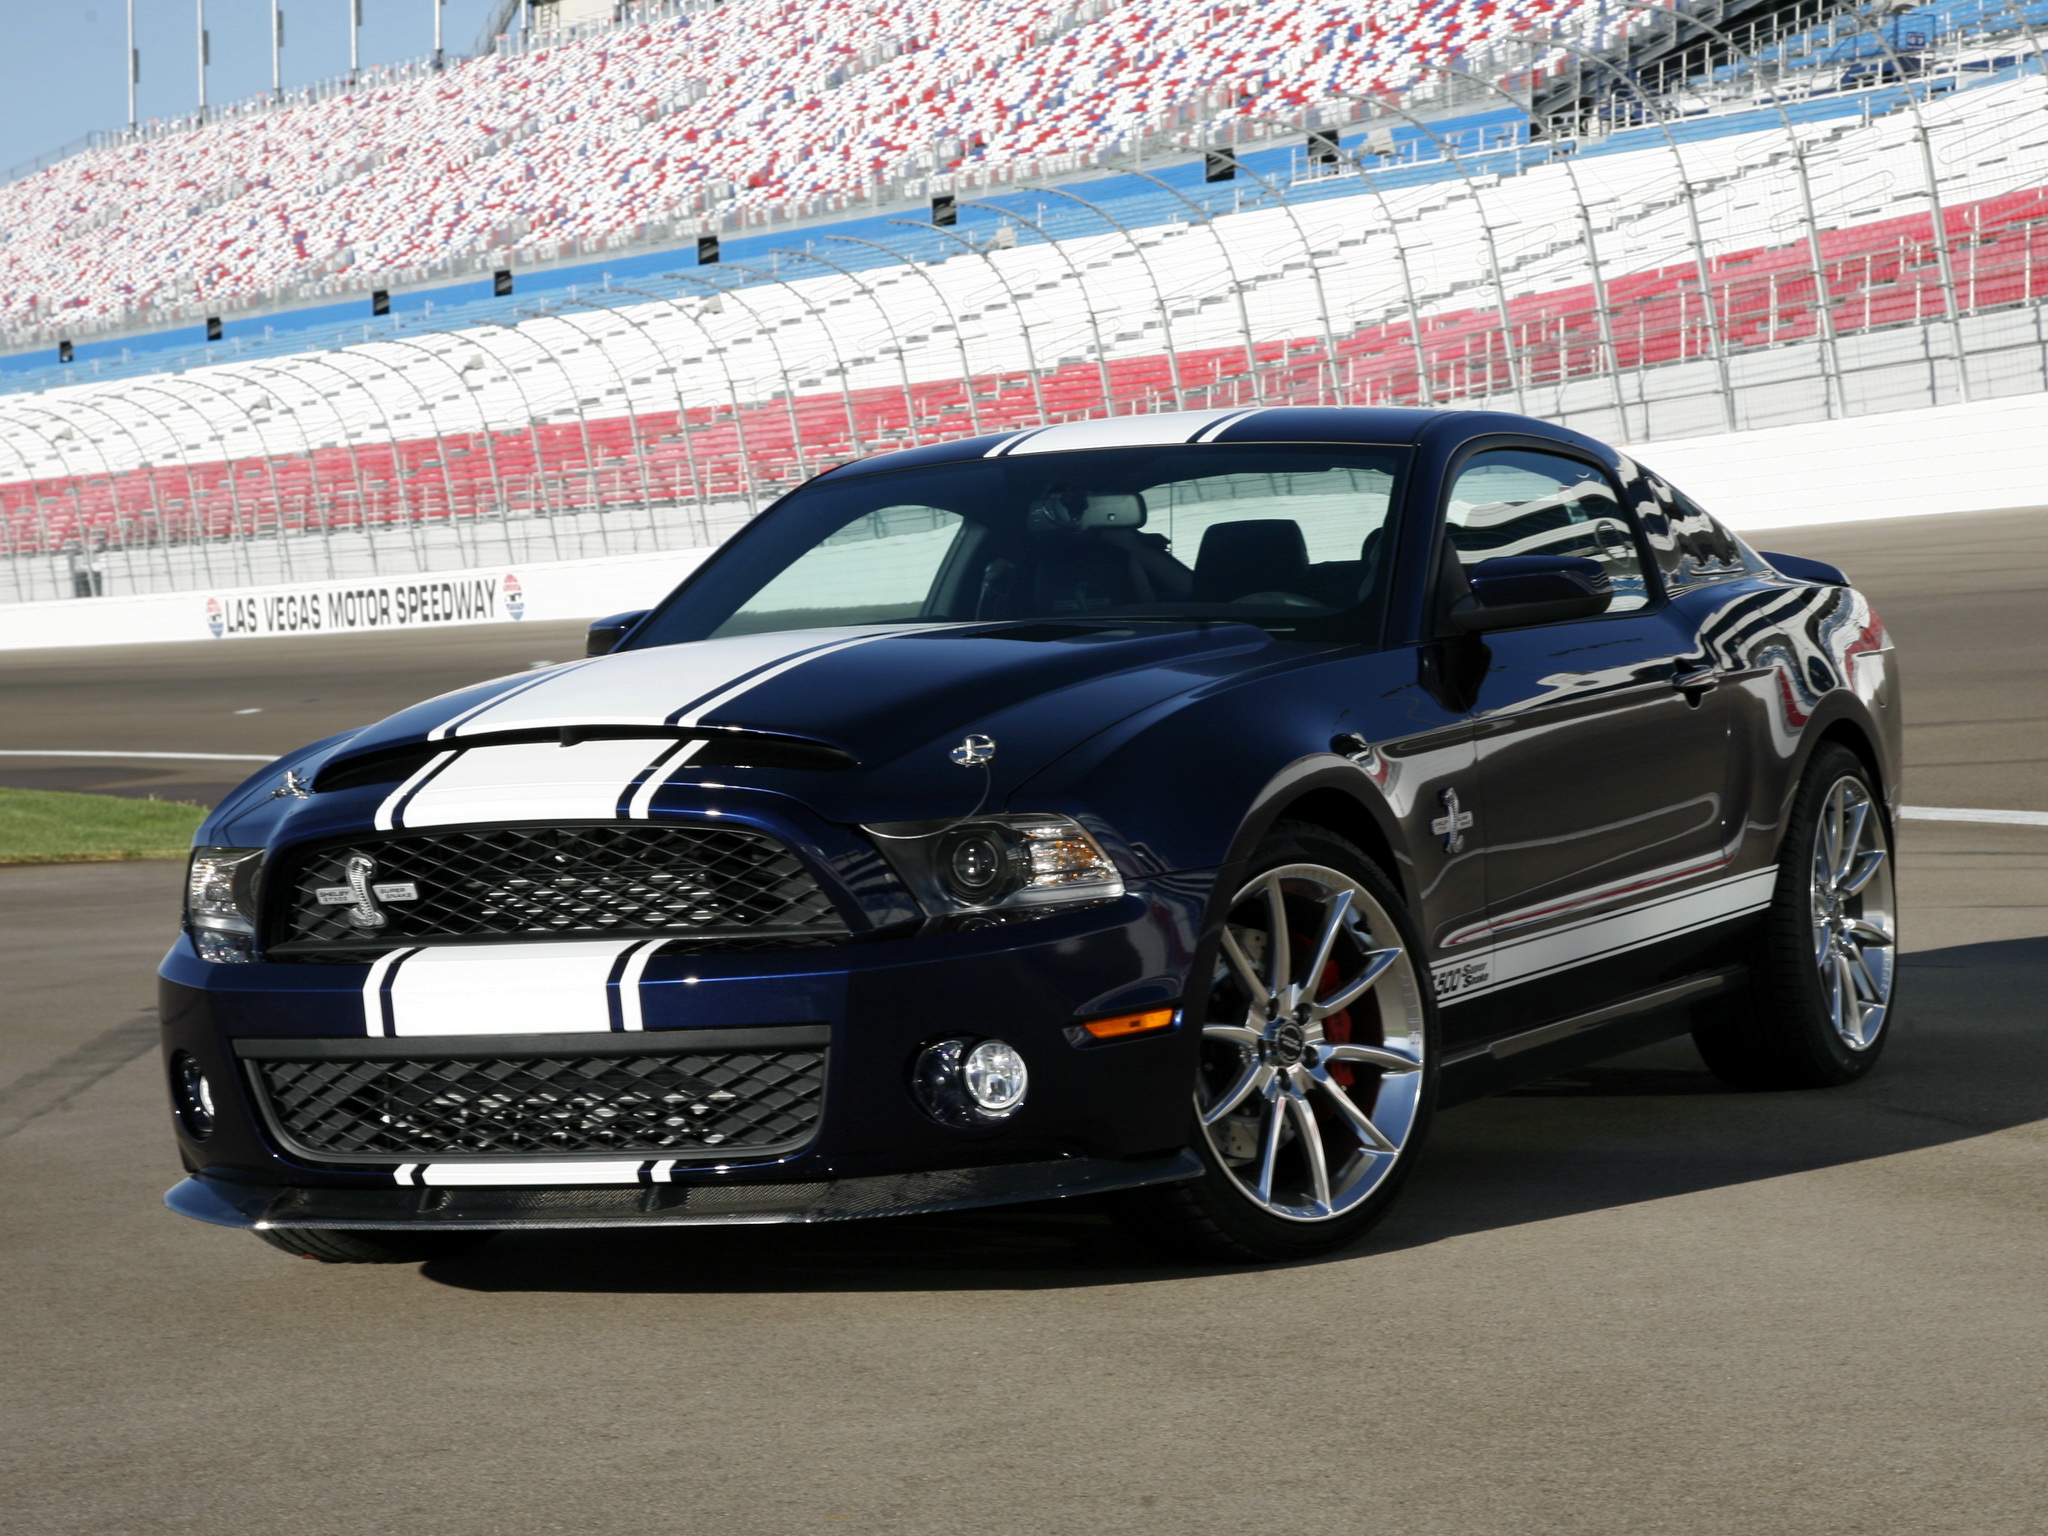 2010, Shelby, Gt500, Super snake, Ford, Mustang, Muscle Wallpapers HD / Des...